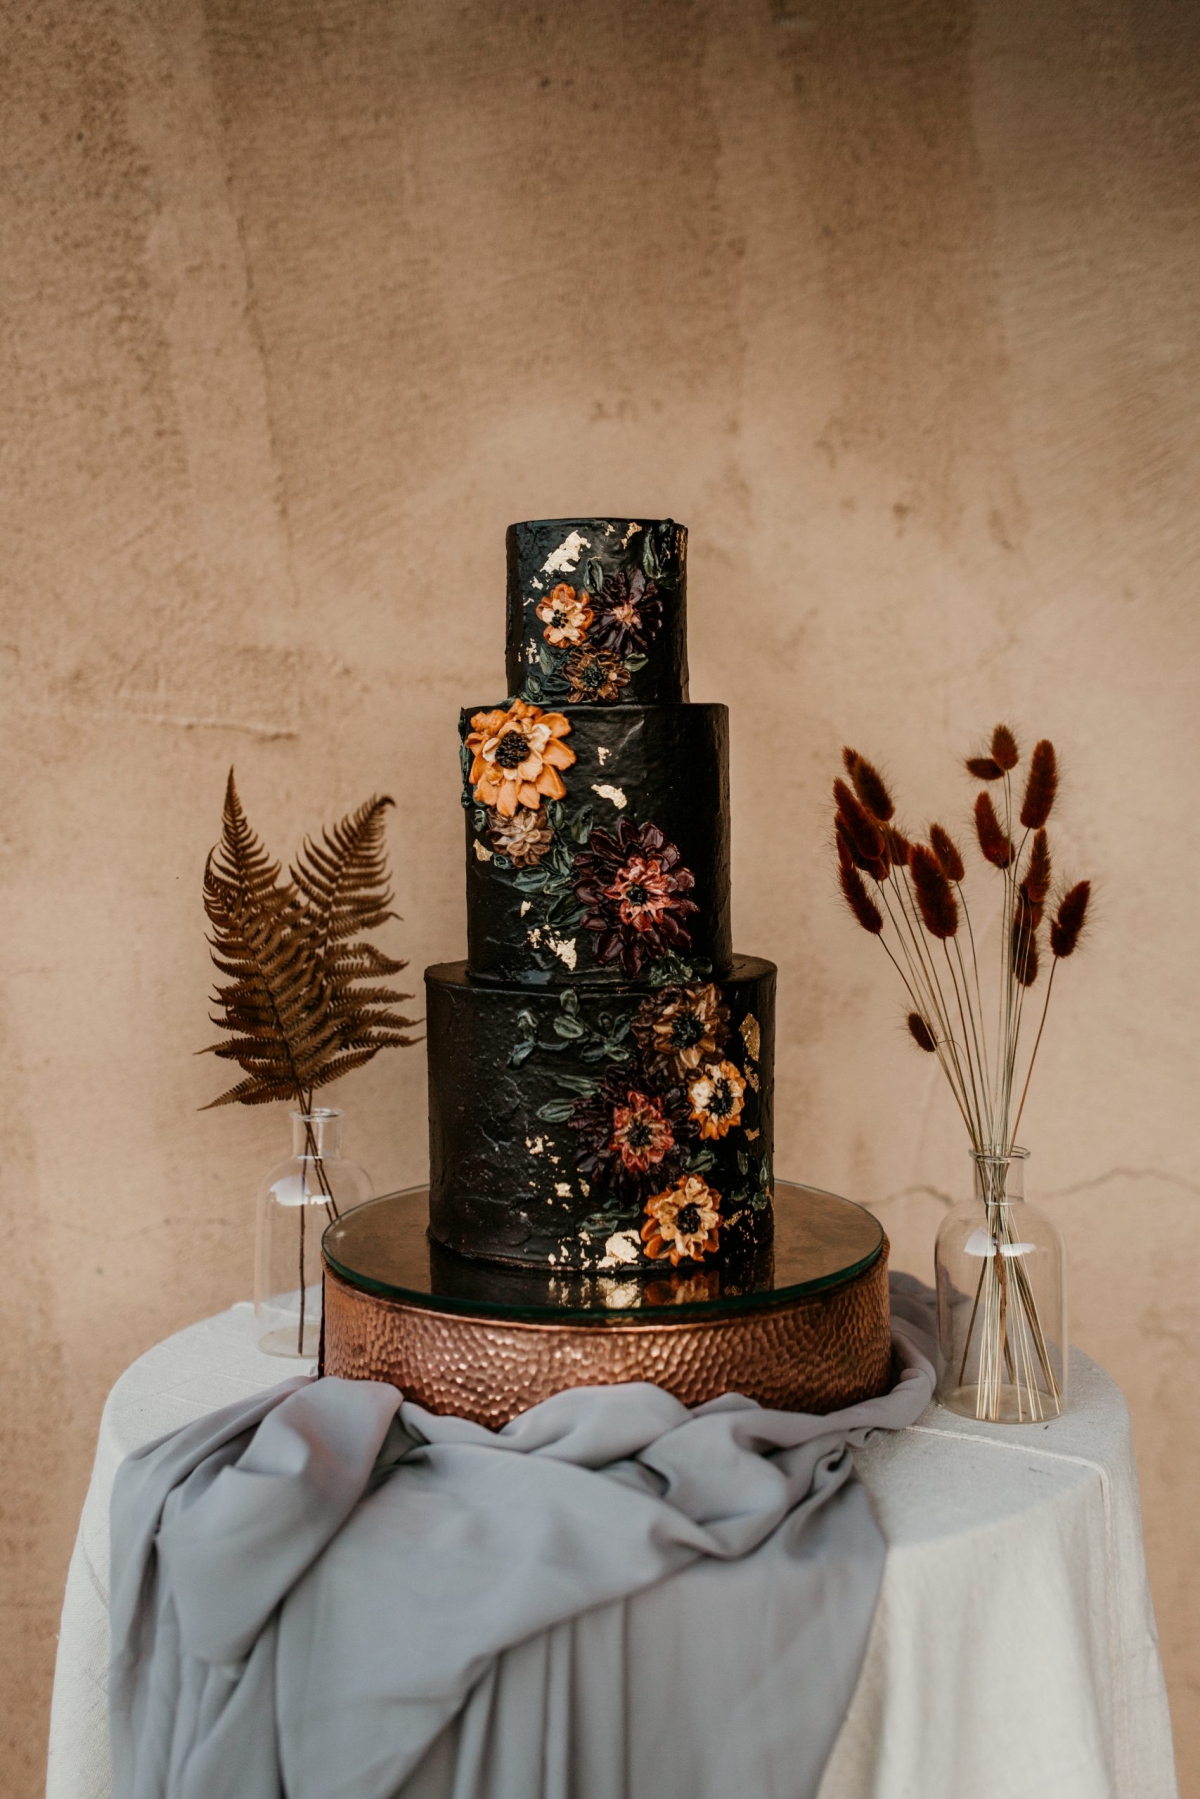 Redefining Tradition: The Allure of a Daring Black Wedding Cake